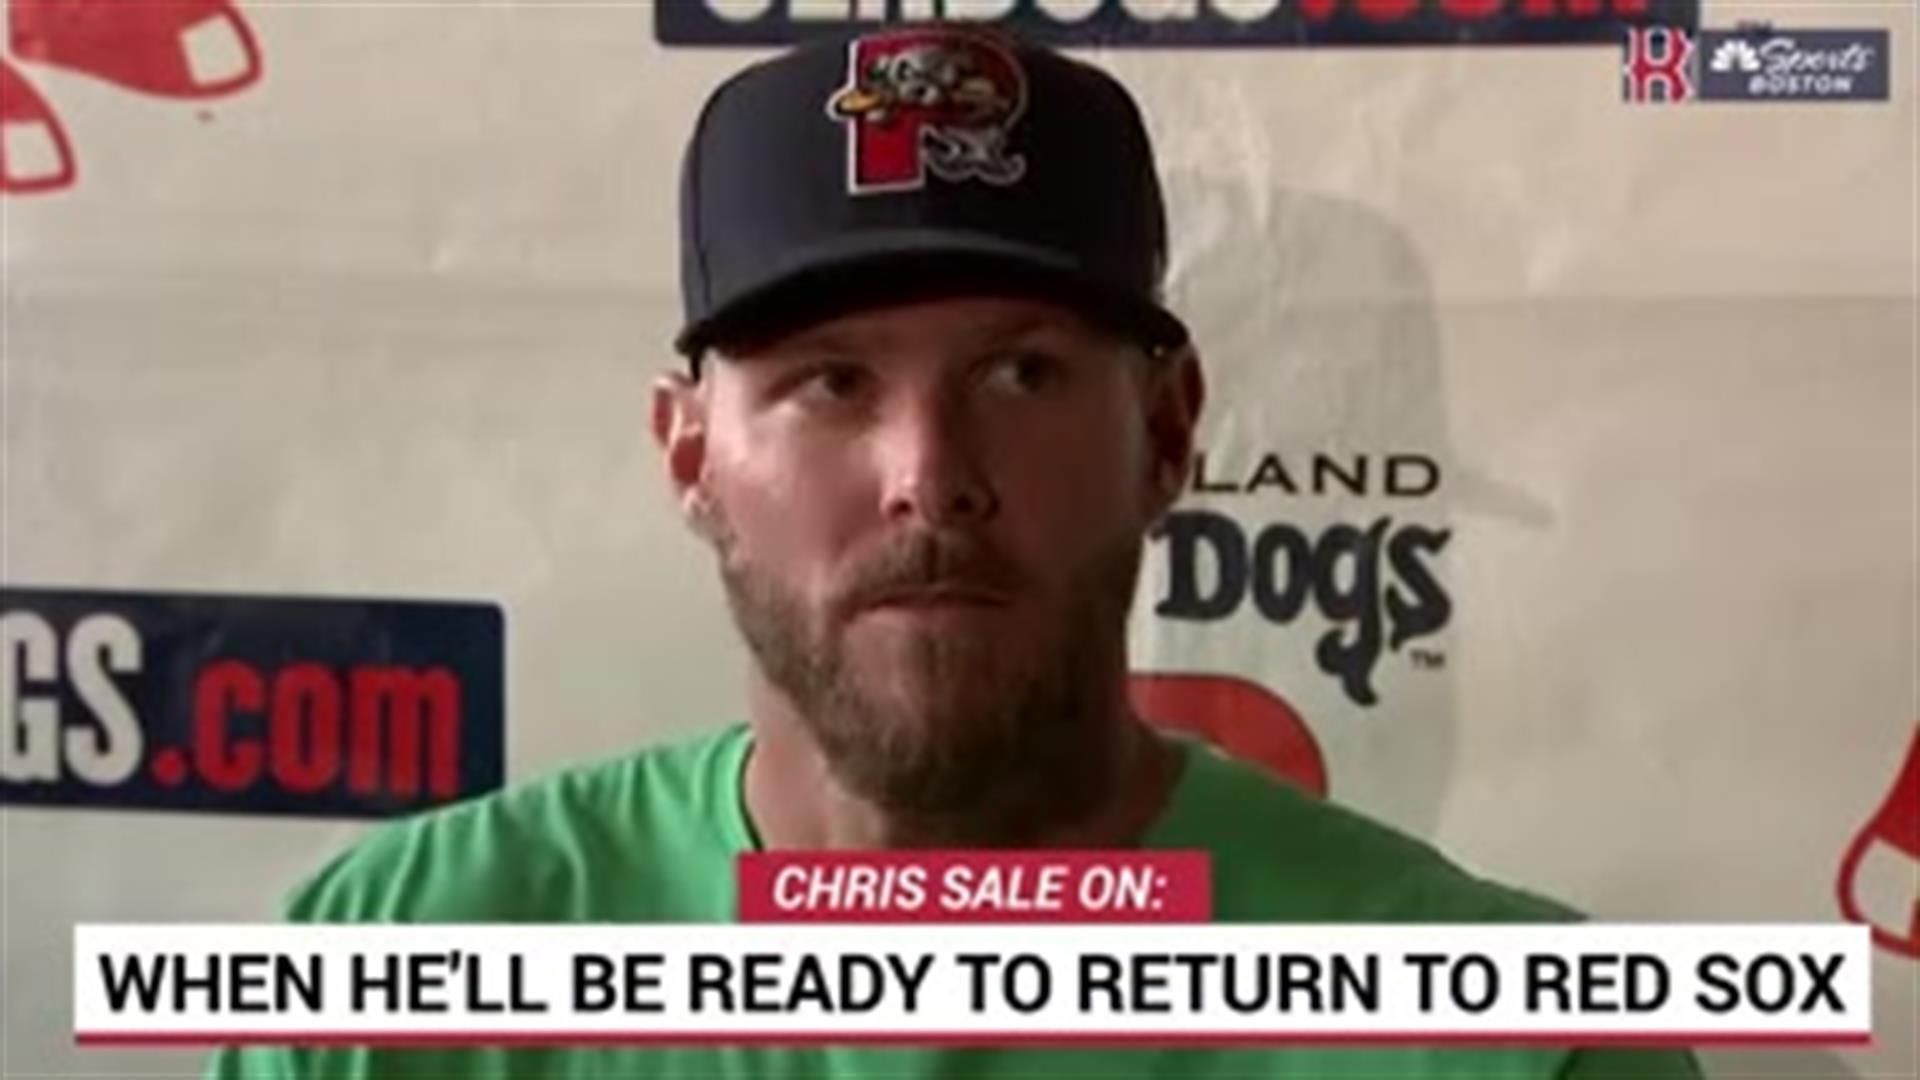 Red Sox: Chris Sale placed on 15-day IL after shoulder injury